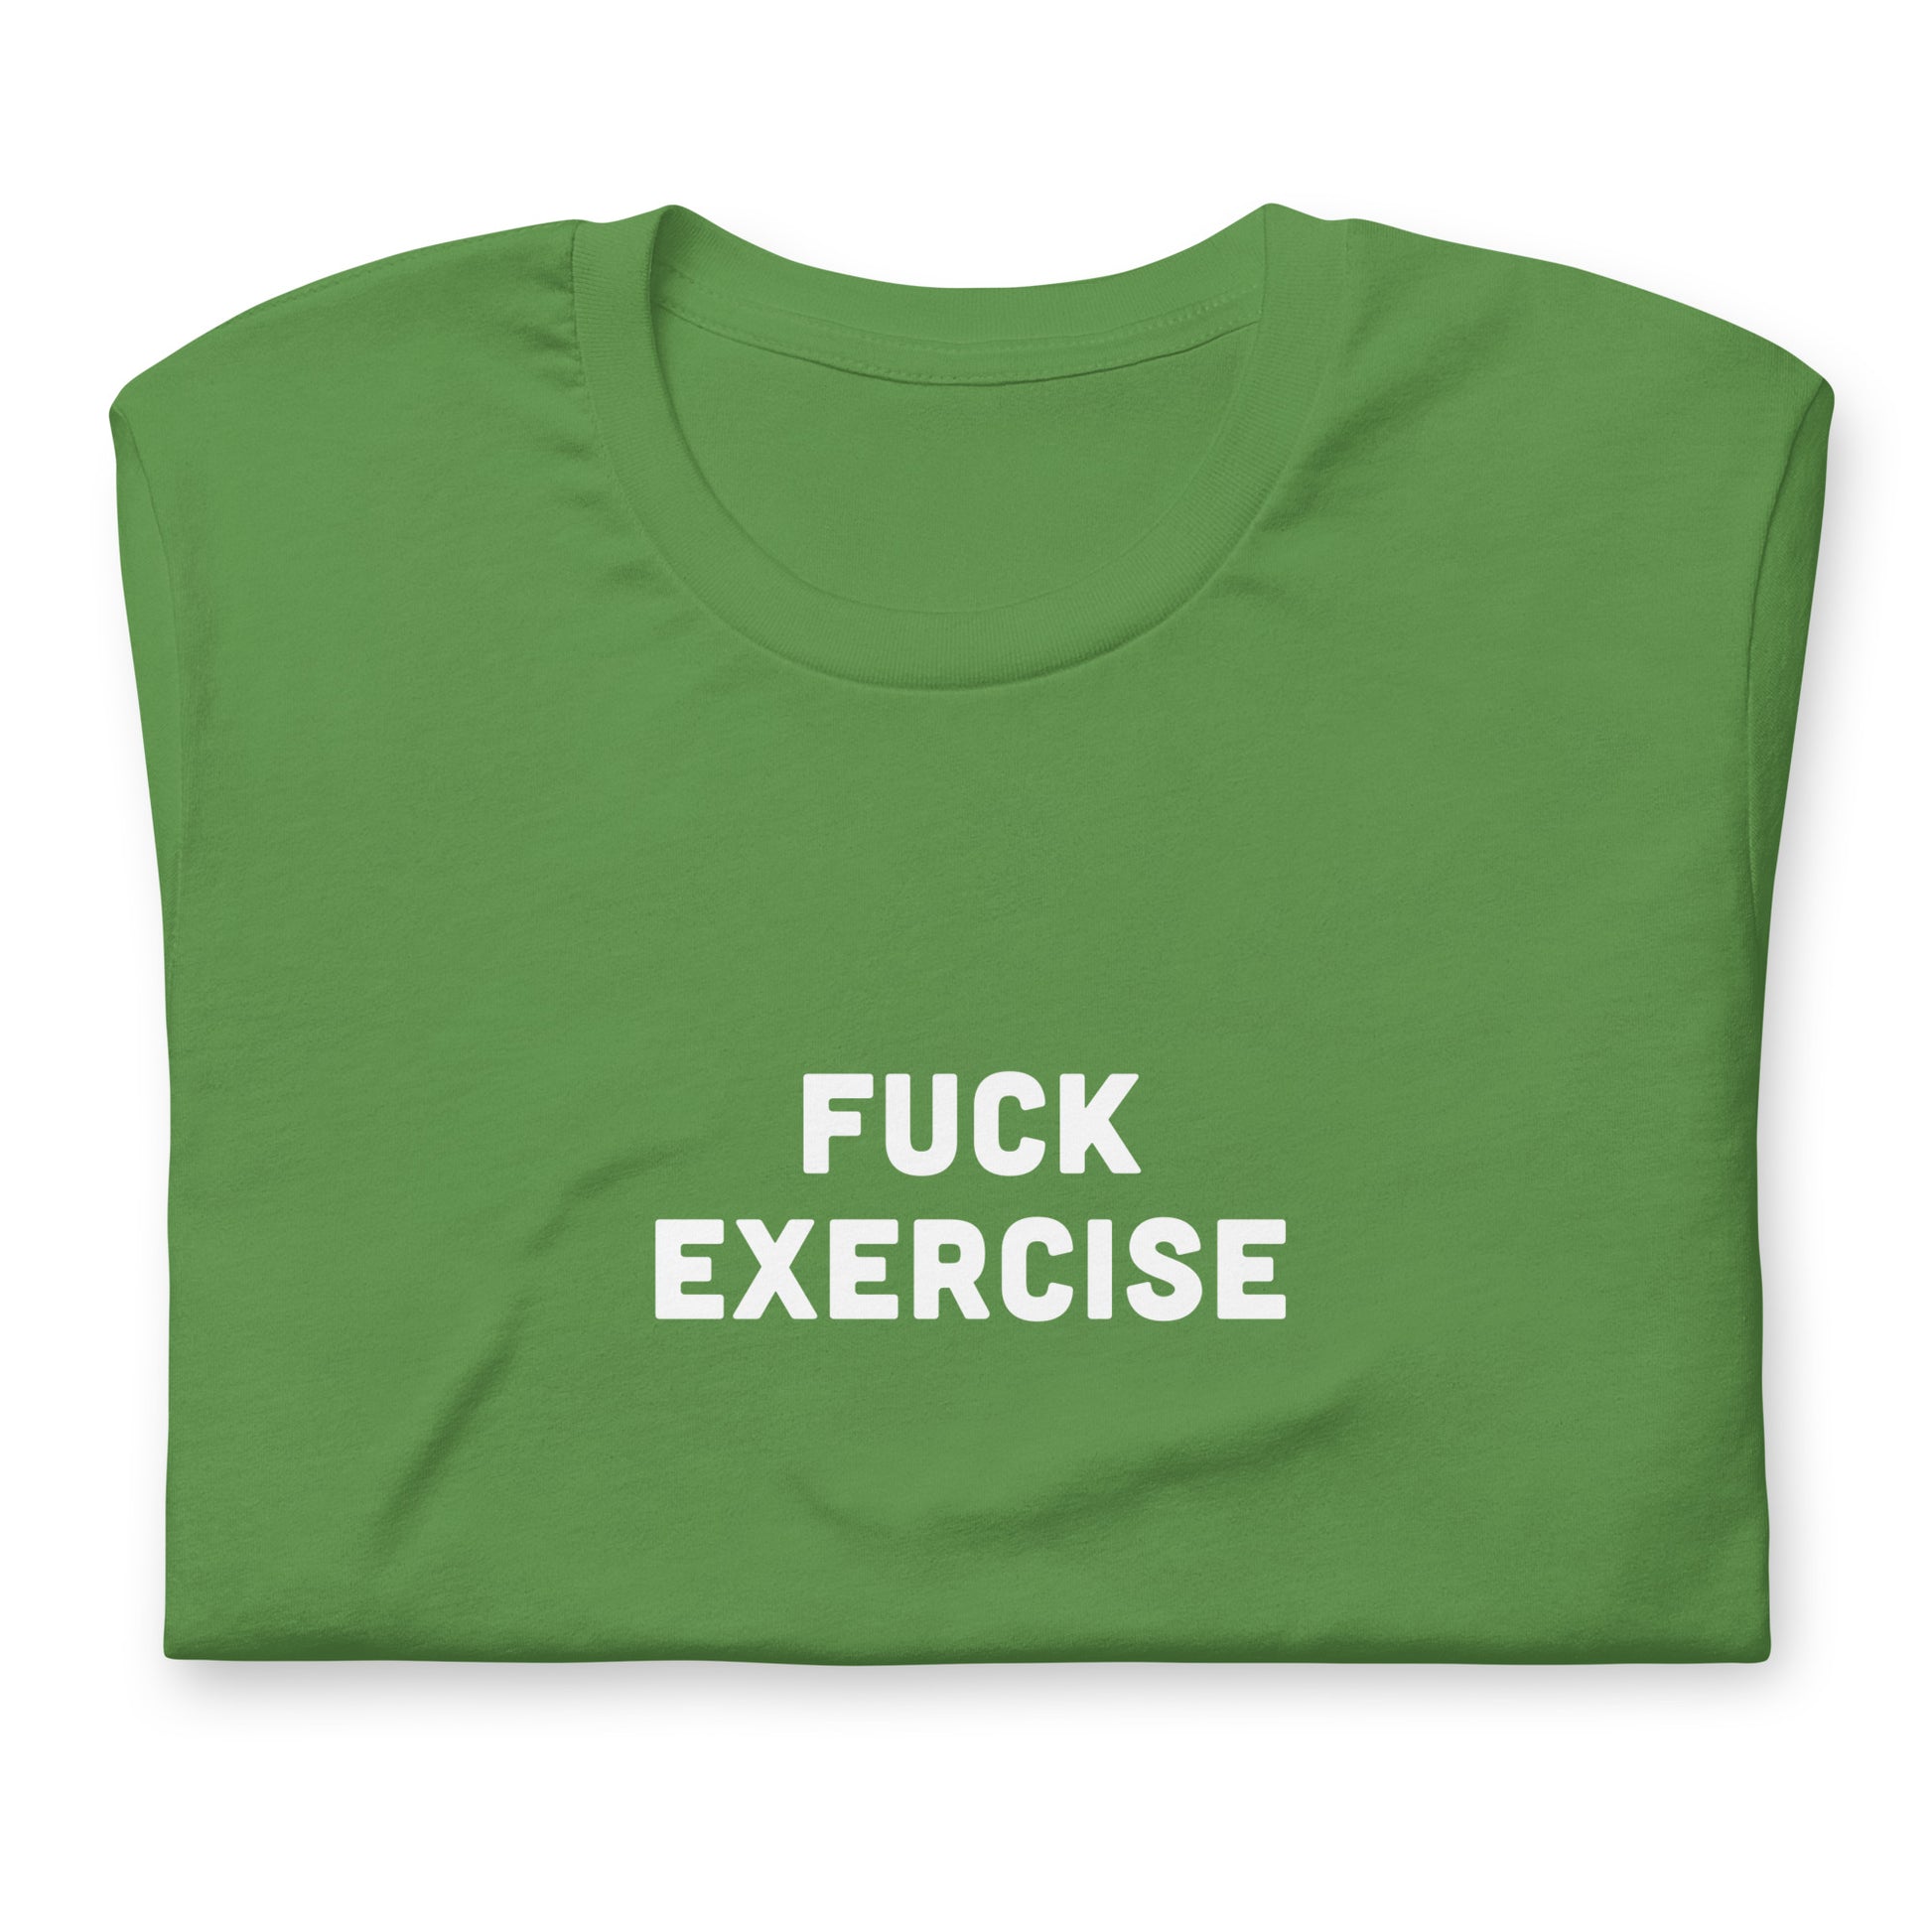 Fuck Exercise T-Shirt Size 2XL Color Navy